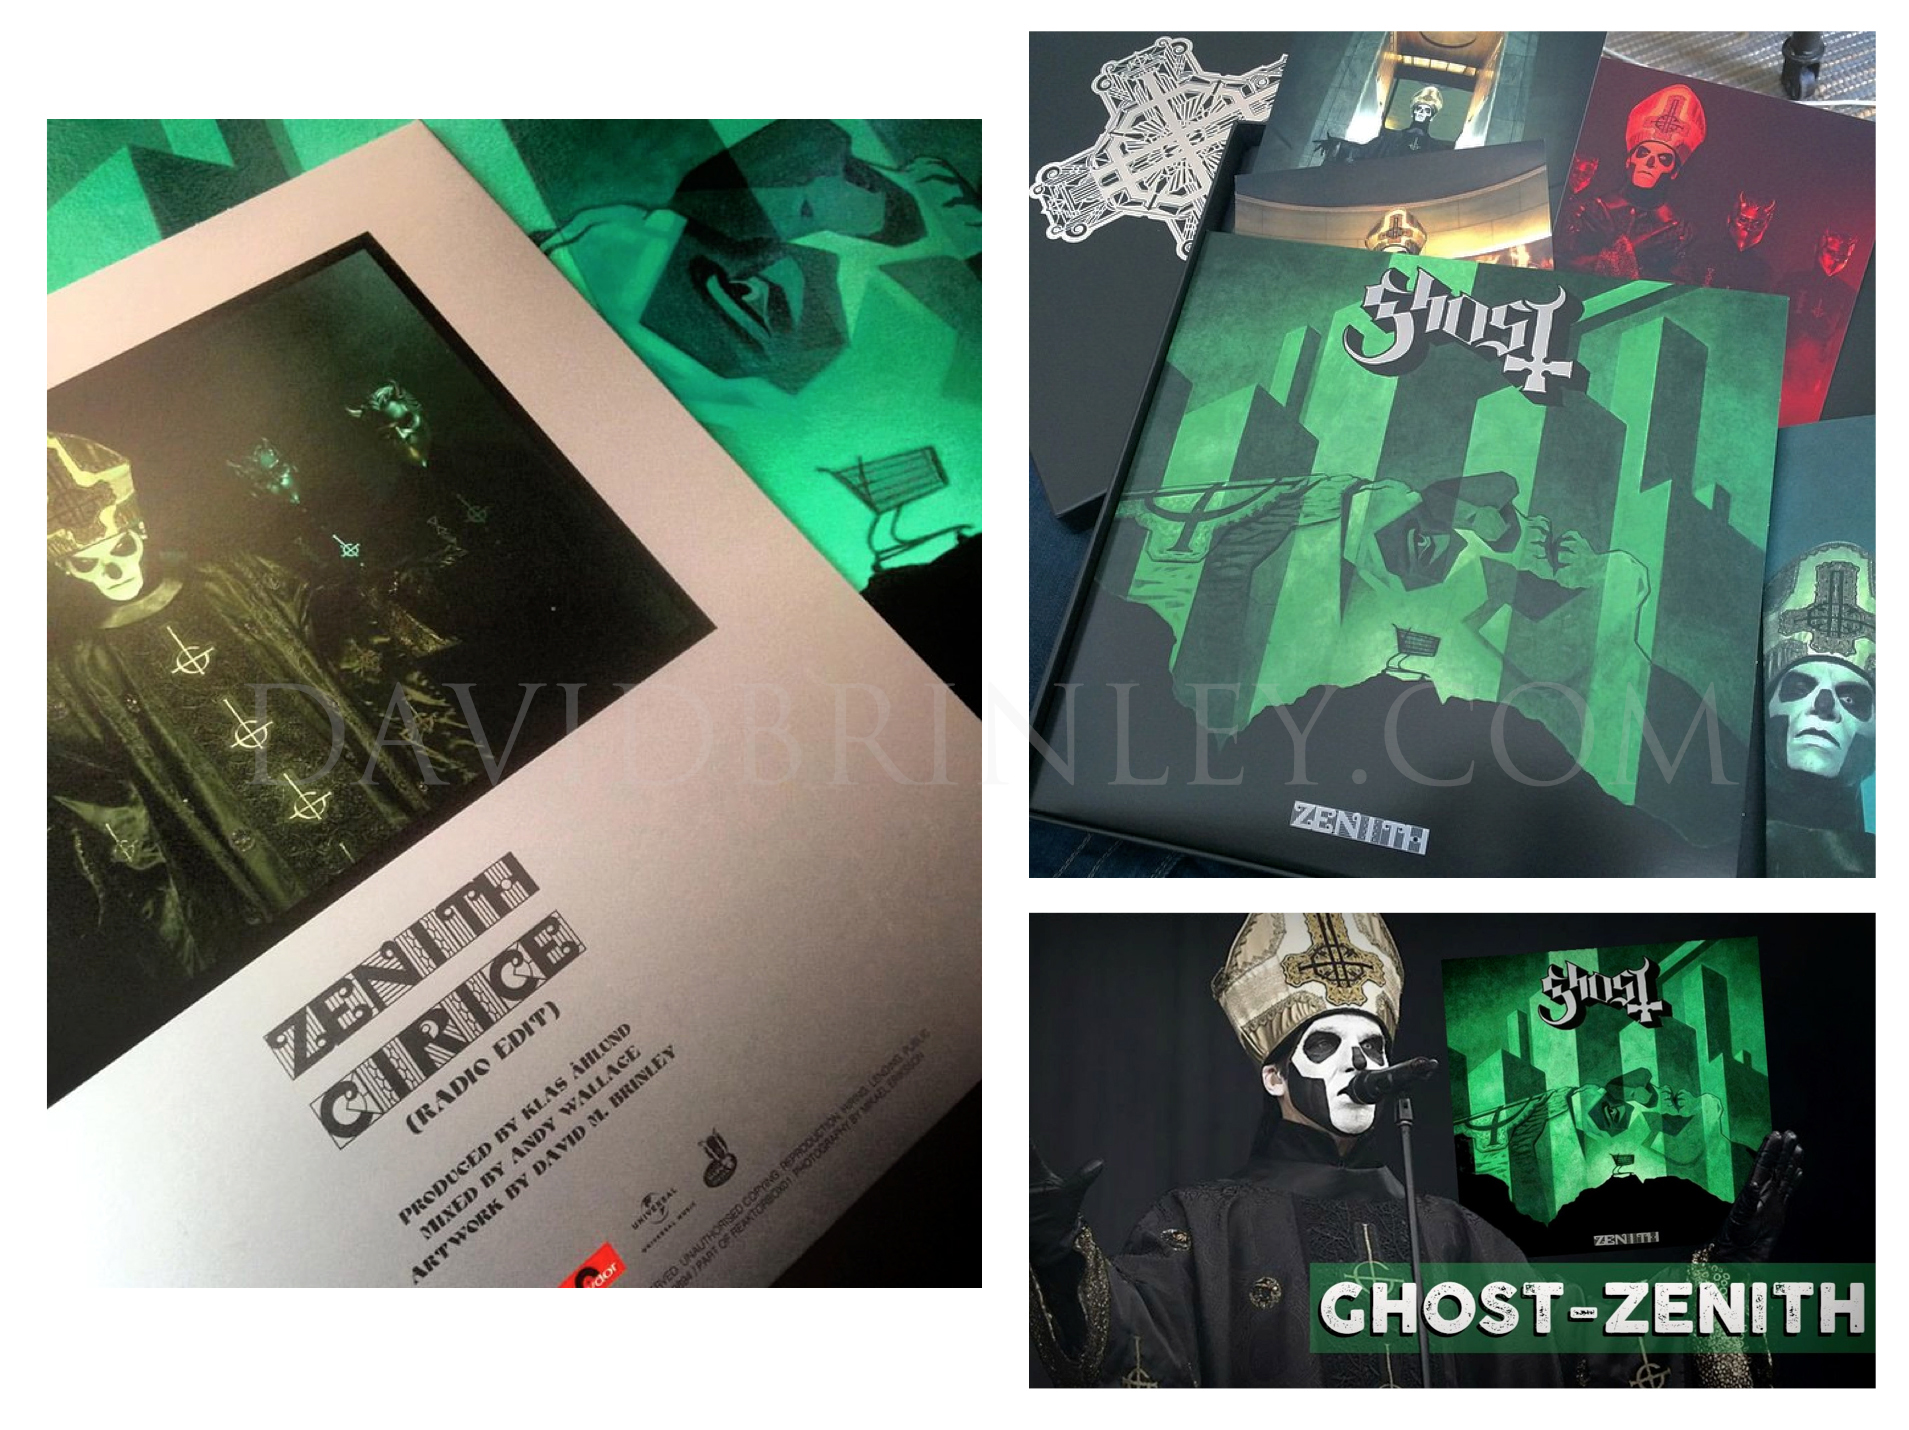   GHOST | Zenith | Meliora limited edition album box set    Acrylic on paper and digital  Official single 10" vinyl cover  Reaktor Recordings Sweden  limited editoin of 5000 copies 